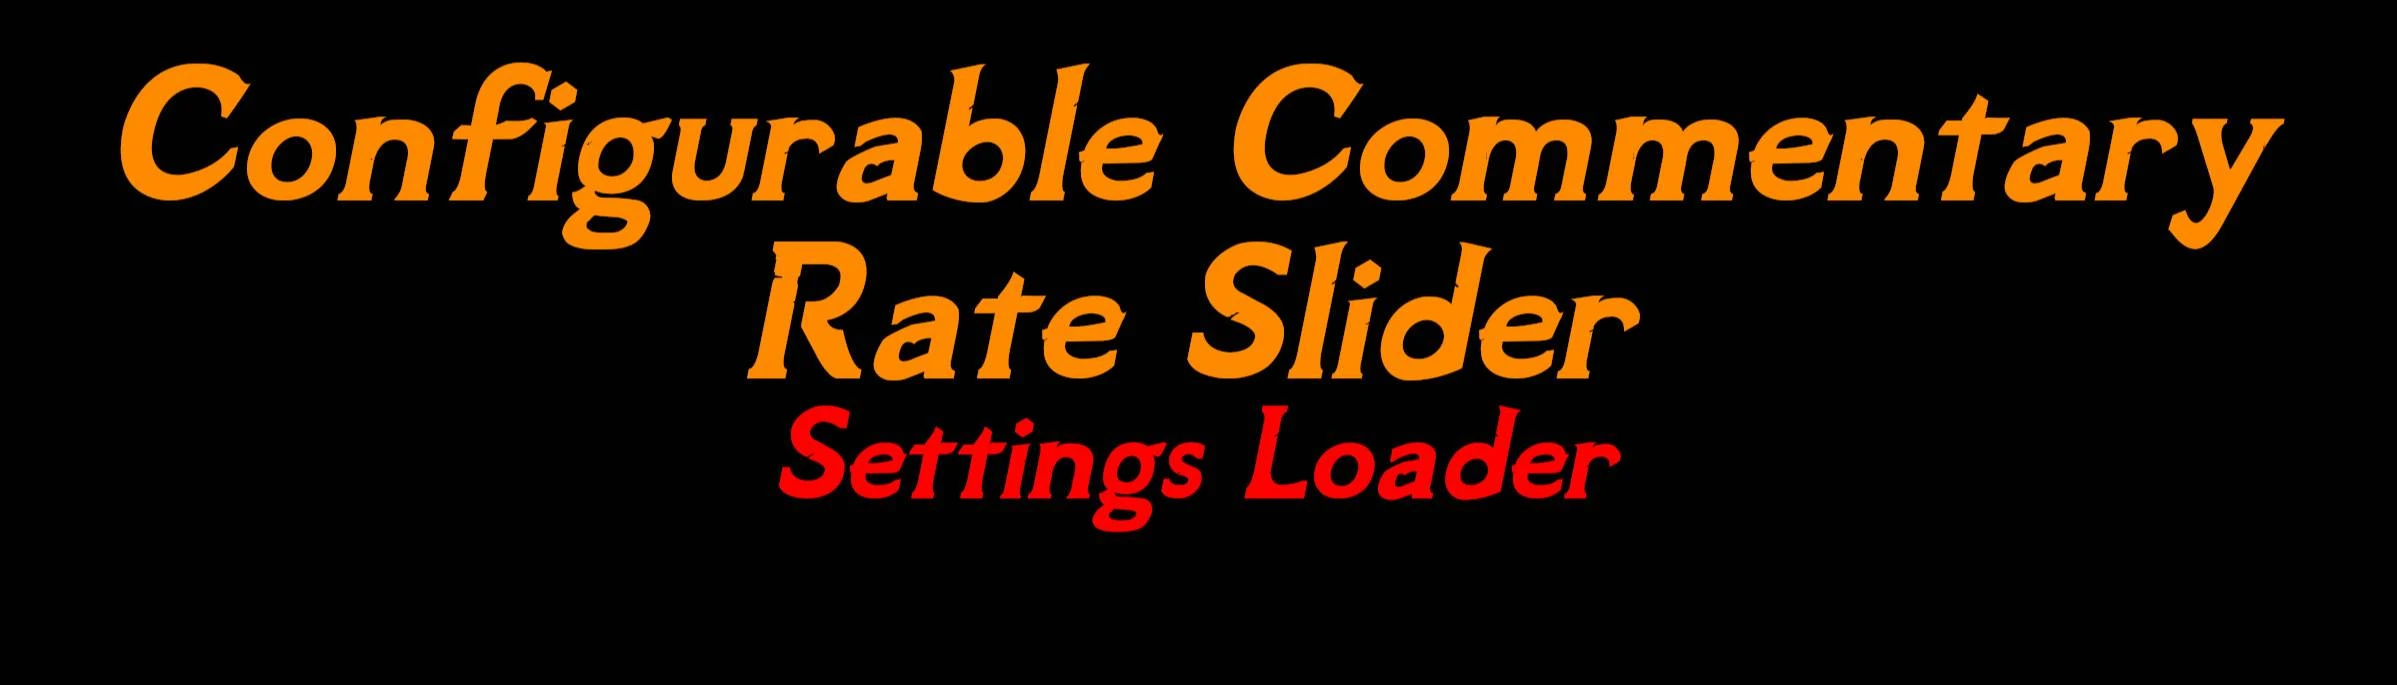 Configurable Commentary Rate Slider - Settings Loader at Skyrim Special ...